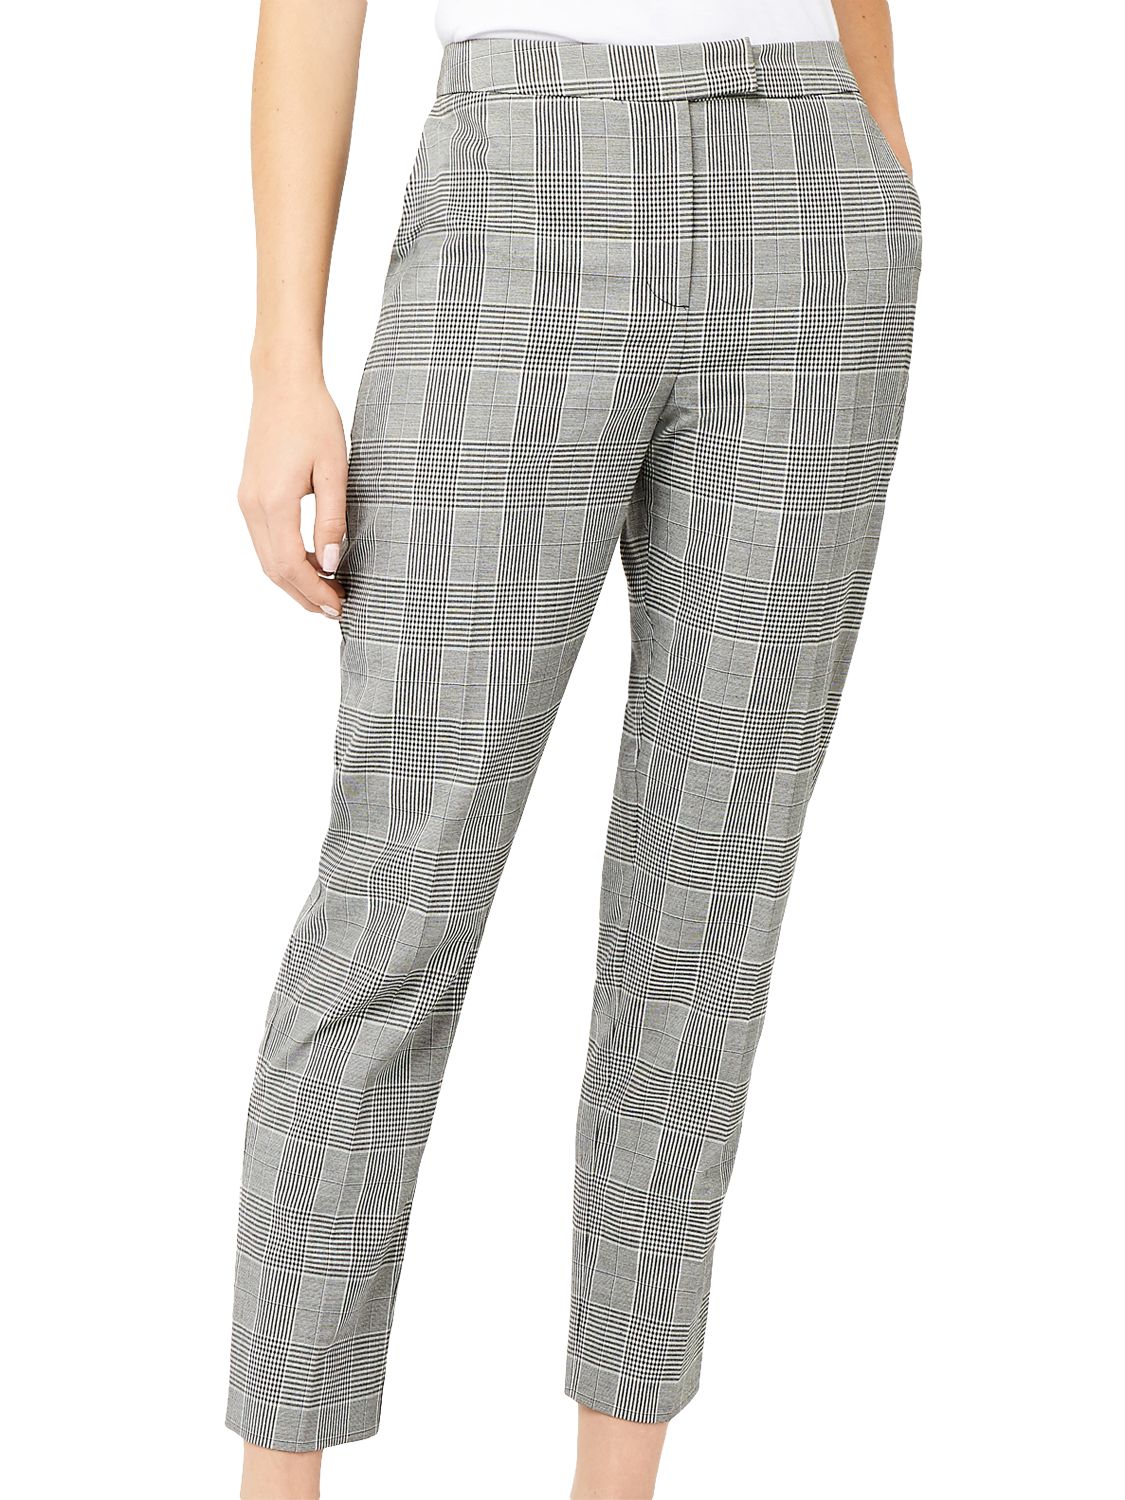 Warehouse Check Tailored Trousers, Black/White